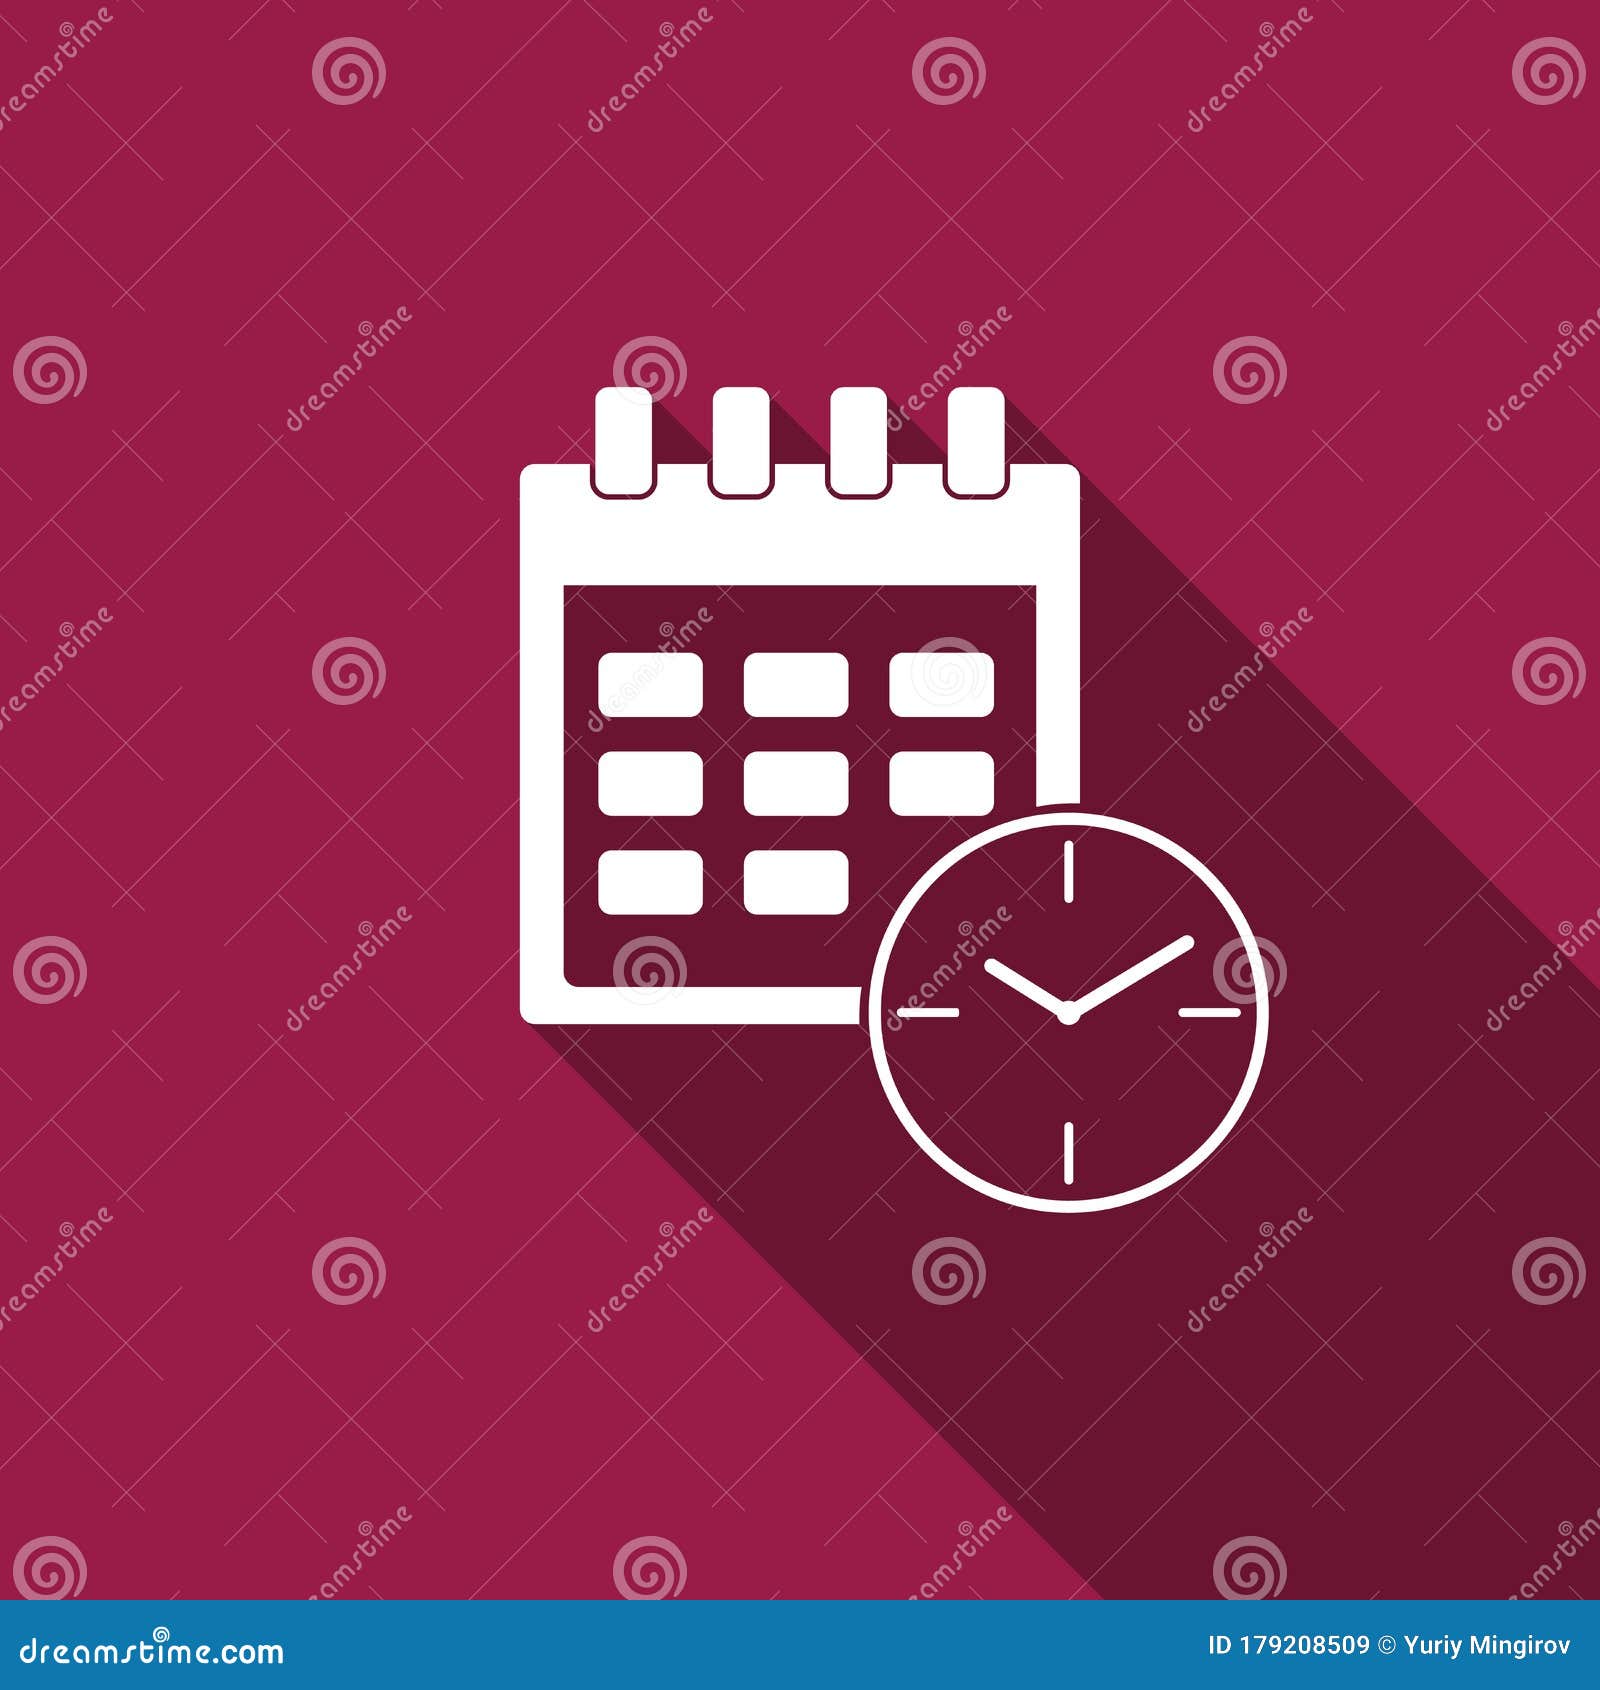 calendar and clock icon  with long shadow.schedule, appointment, organizer, timesheet, time management